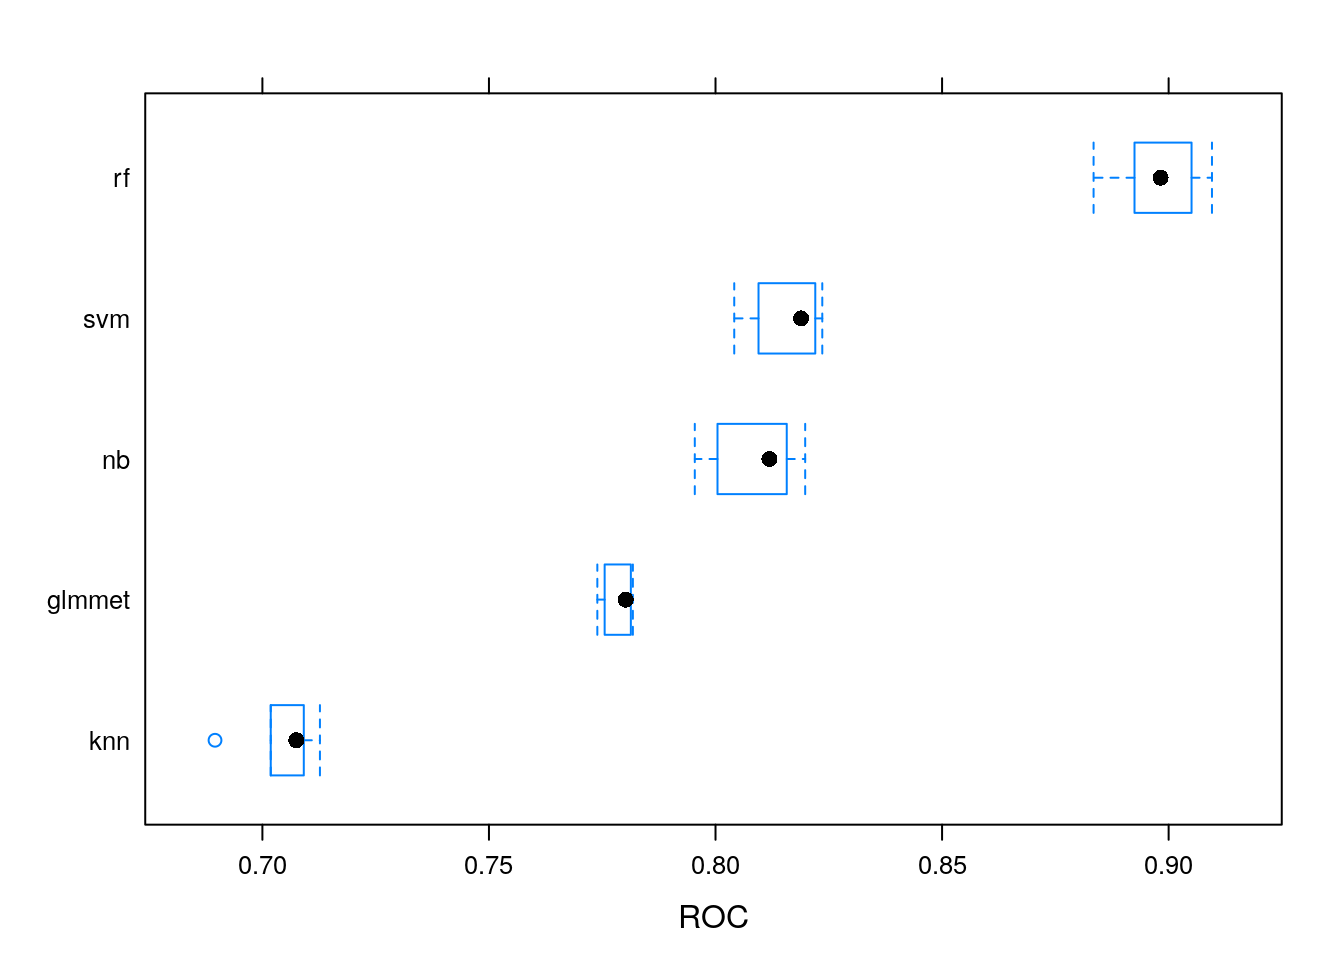 Comparing distributions of AUC values for various models.